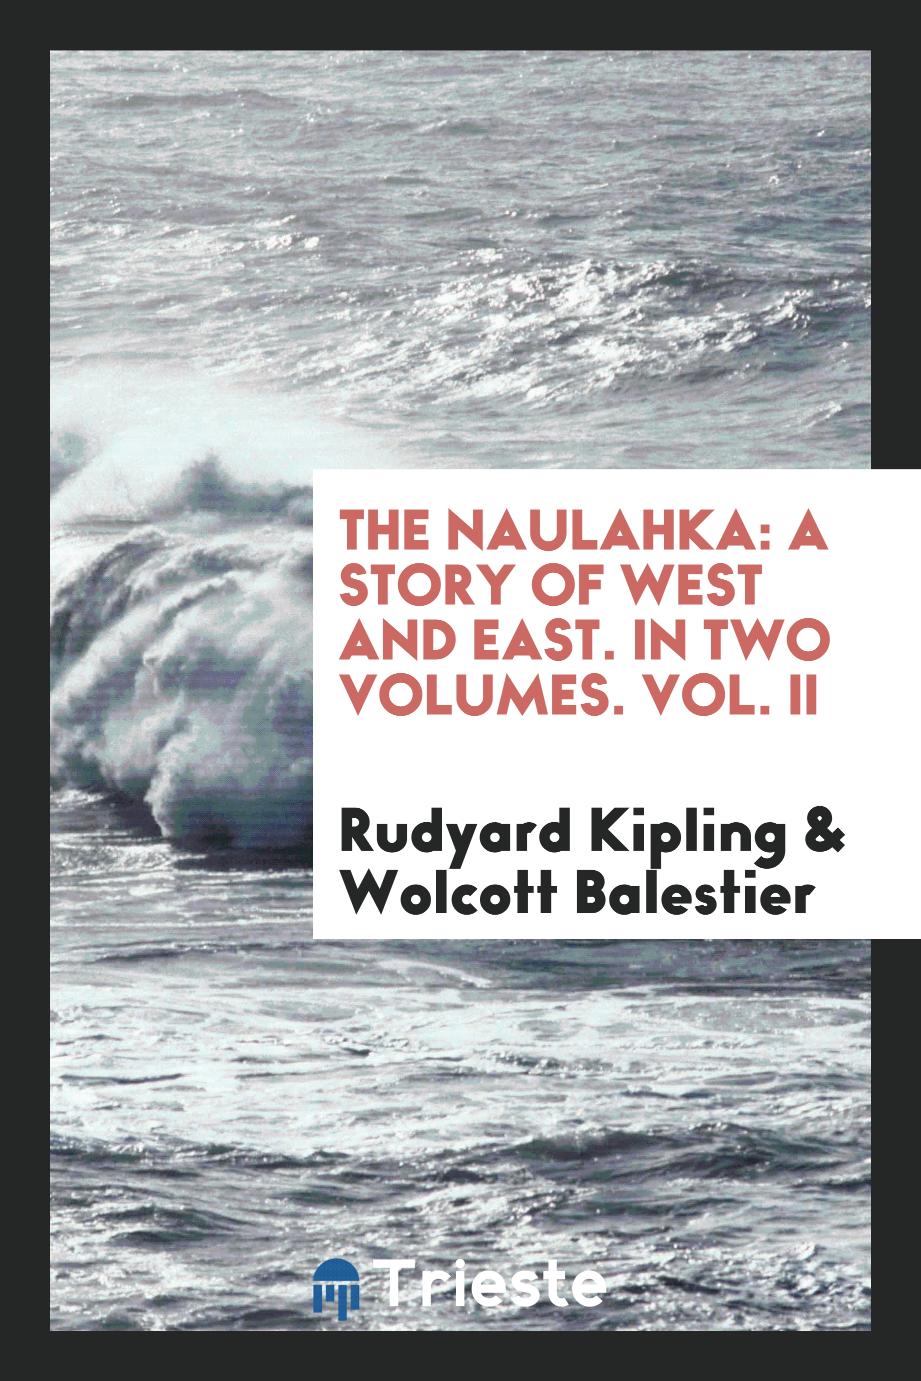 The Naulahka: a story of West and East. In two volumes. Vol. II